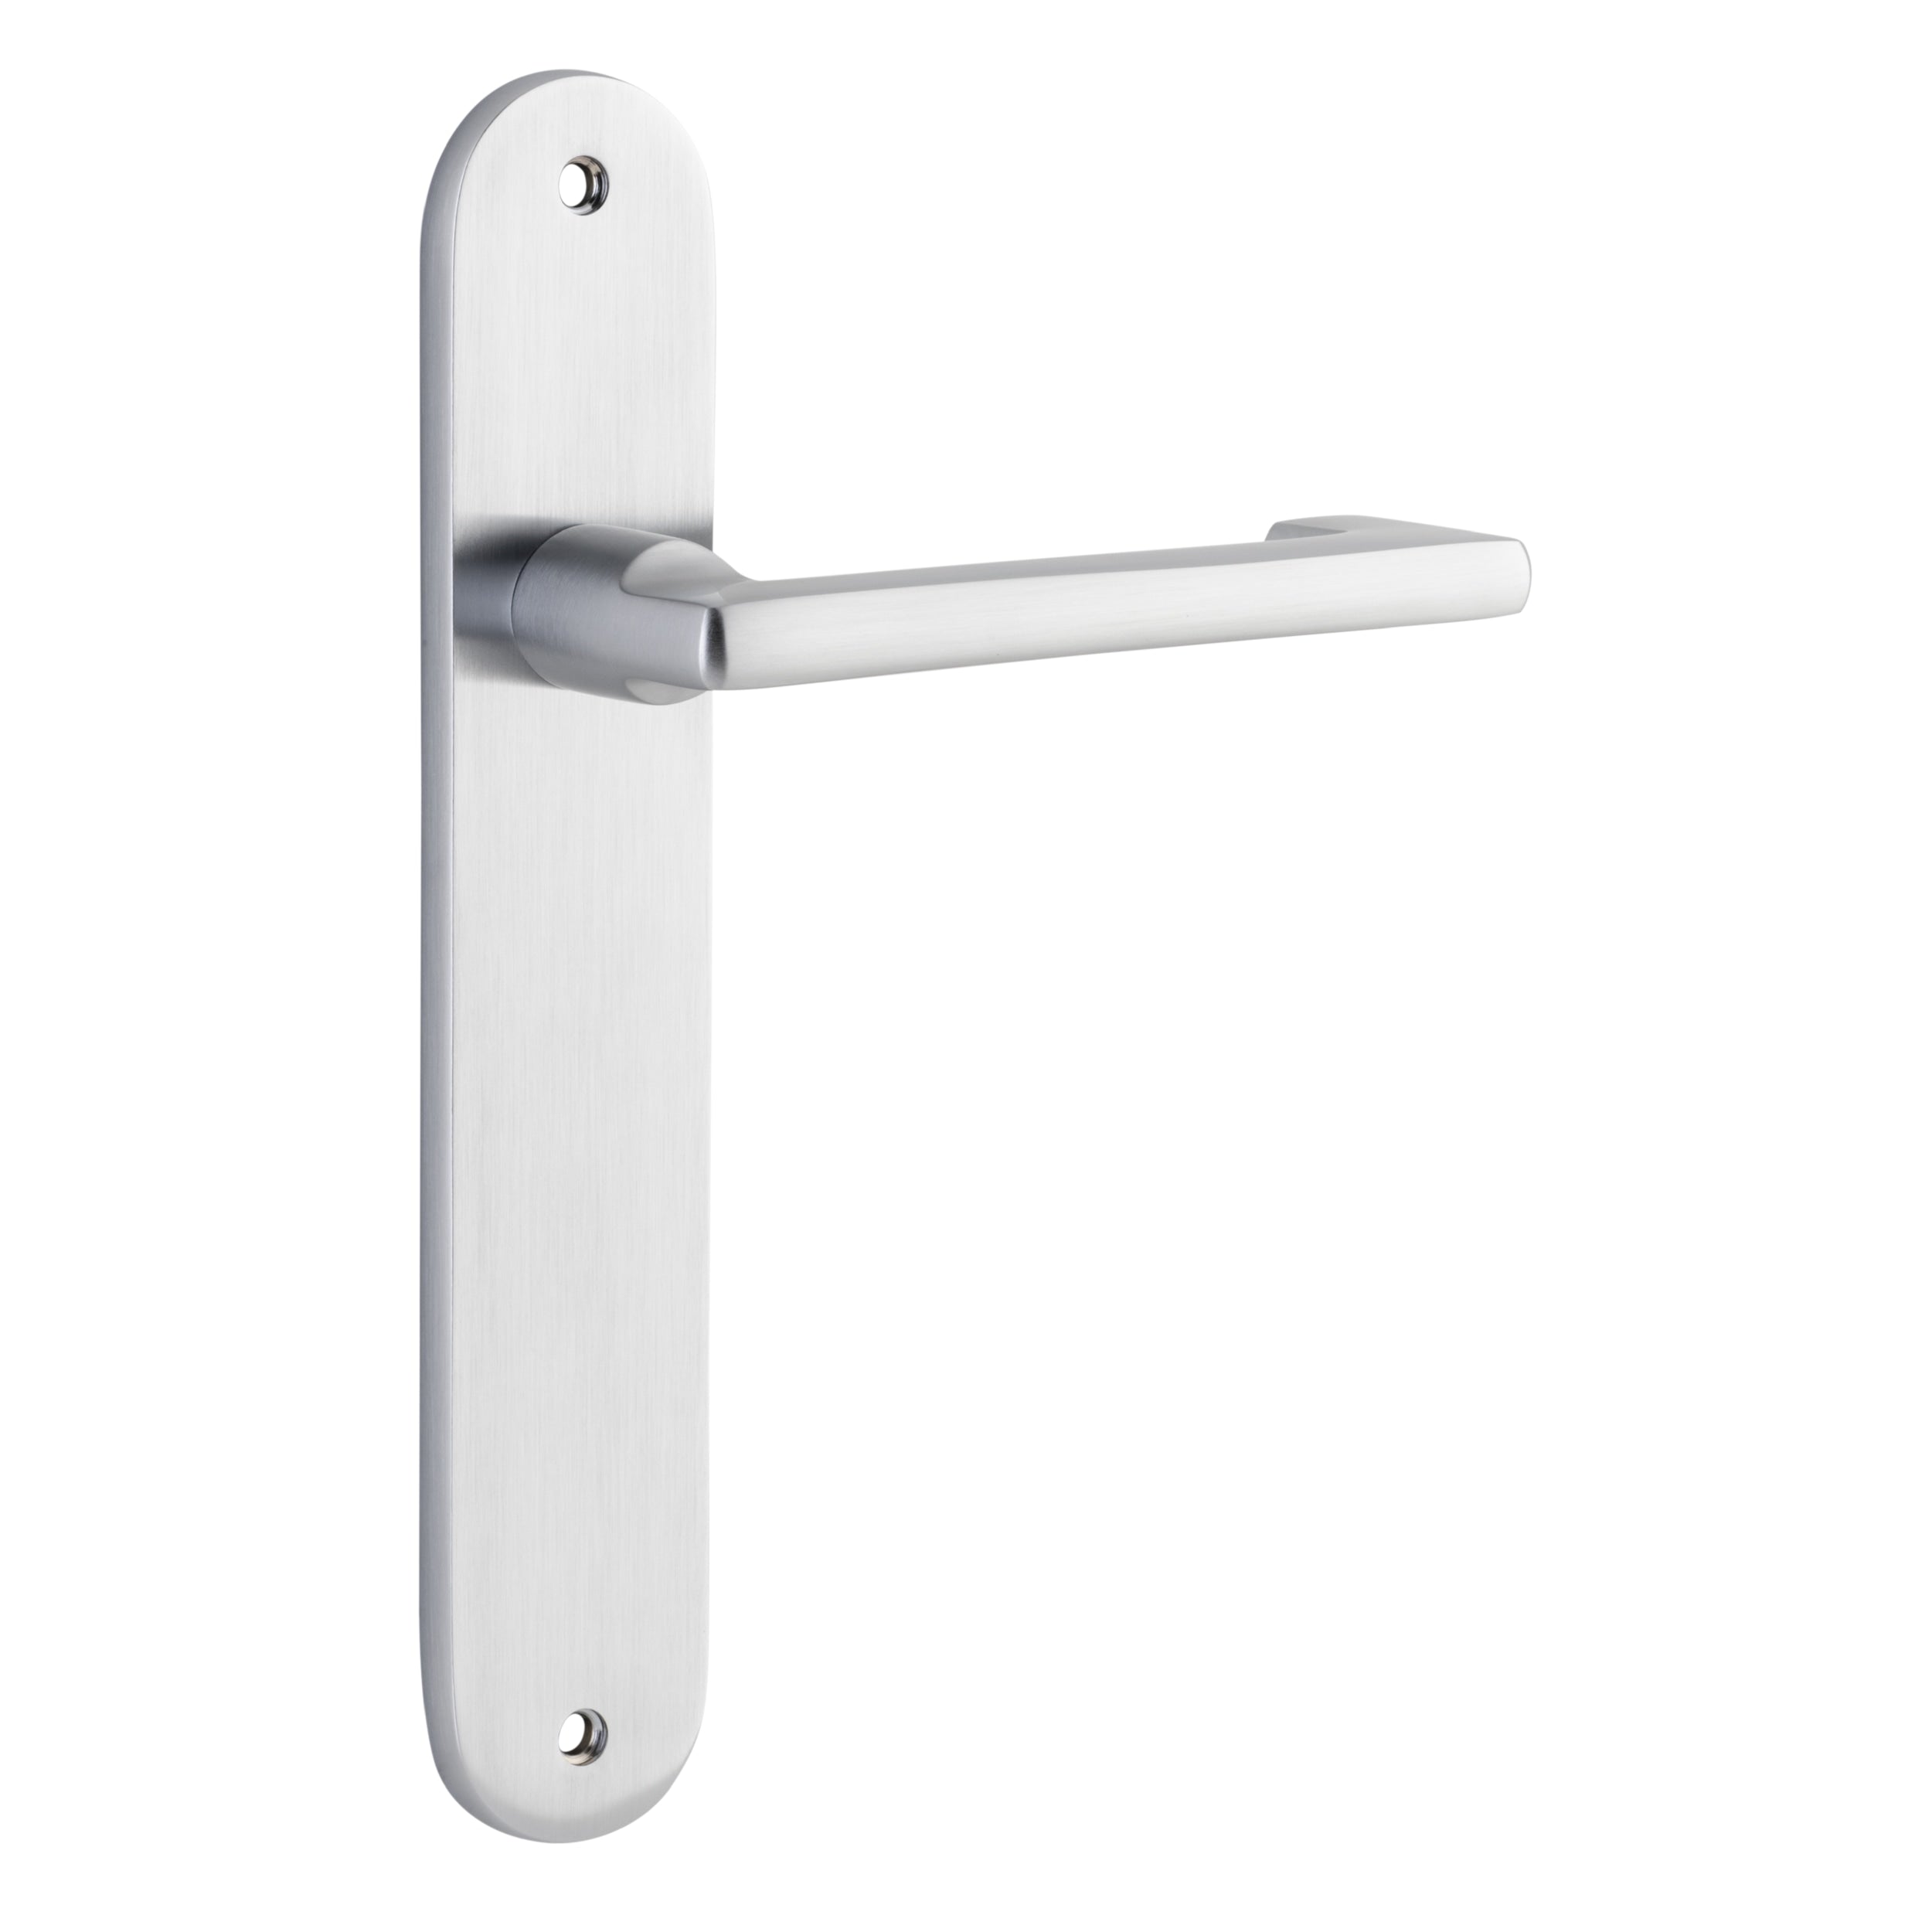 Iver Door Handle Baltimore Return Oval Latch Pair Brushed Chrome